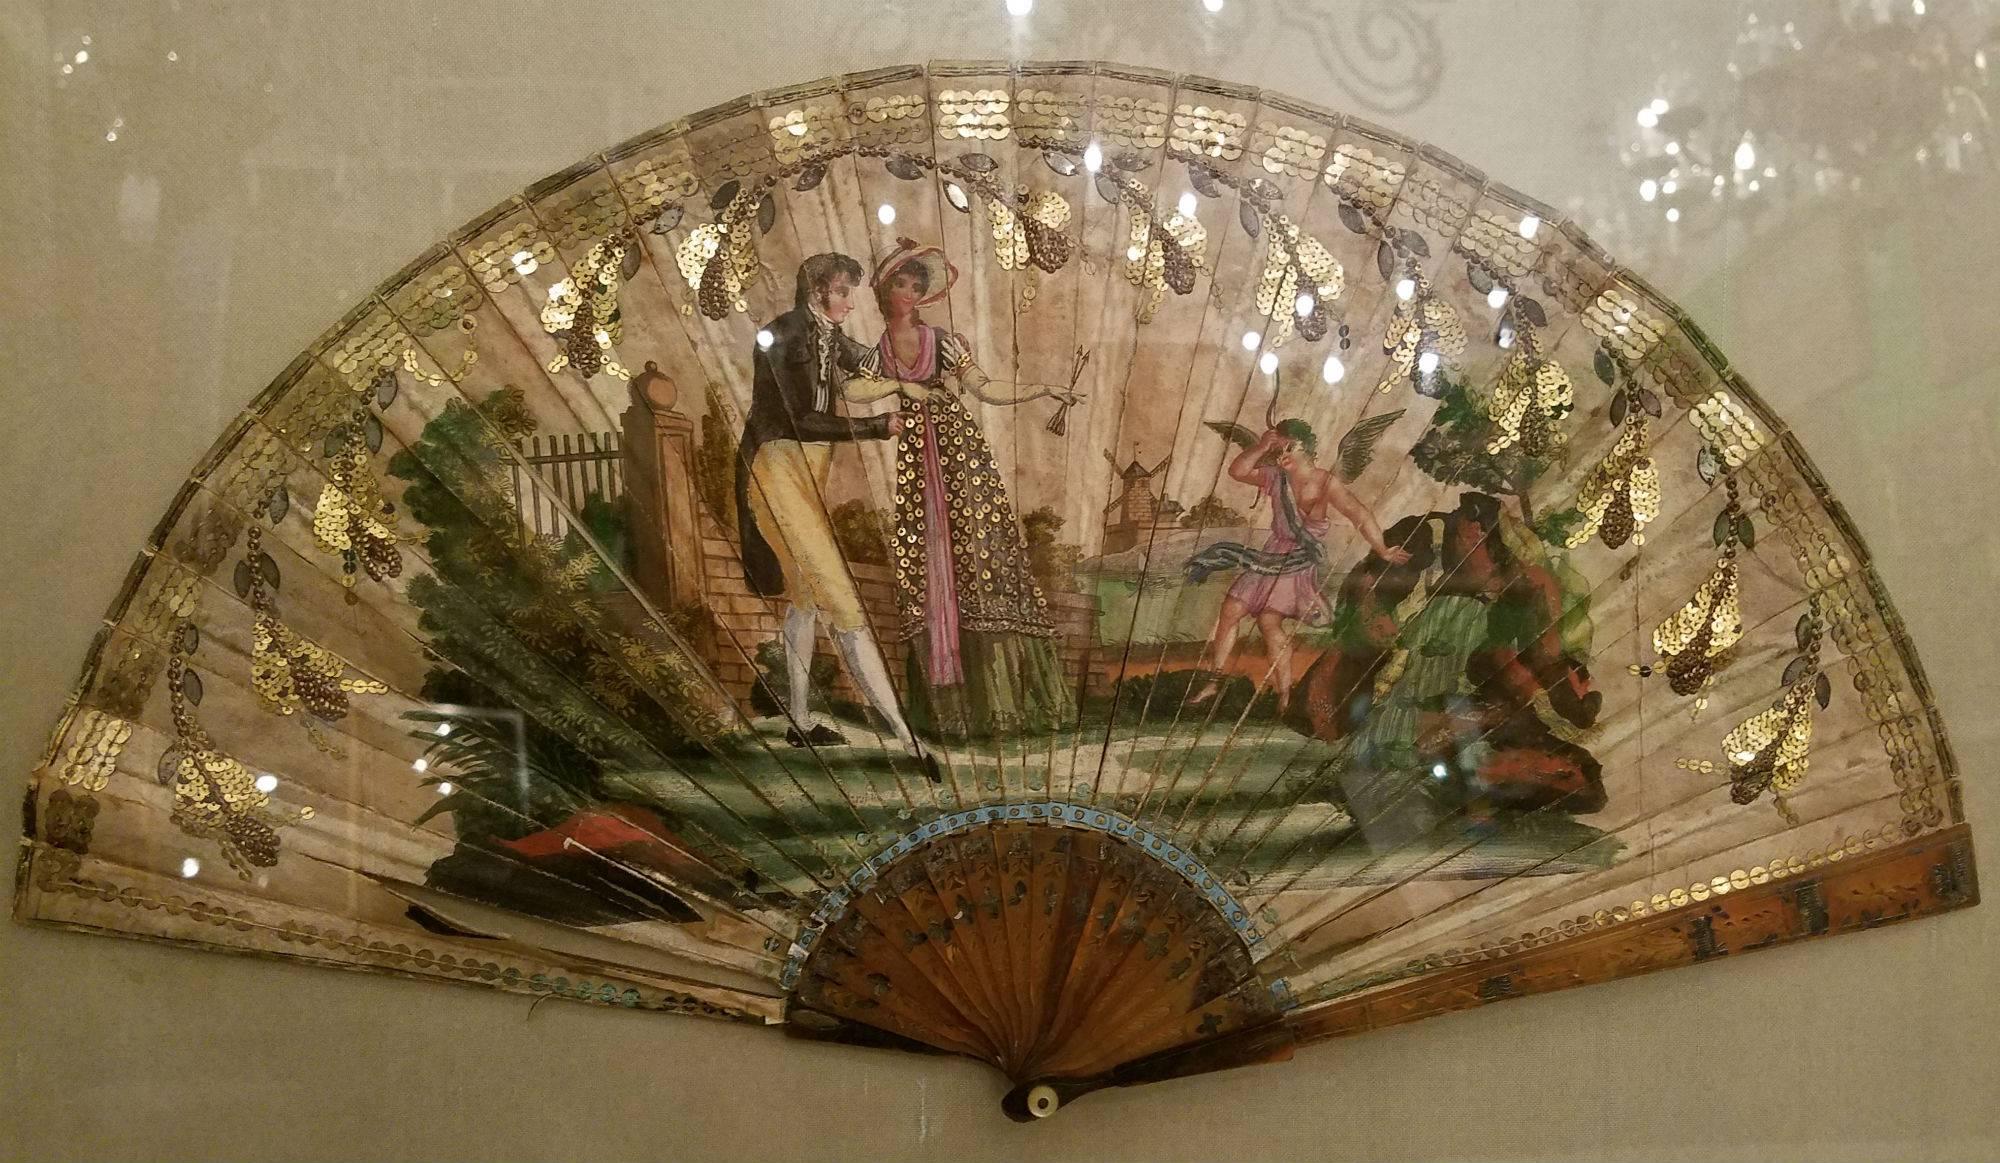 French hand-painted fan in a shadow box frame. Framed: H 15.25, W 22.75